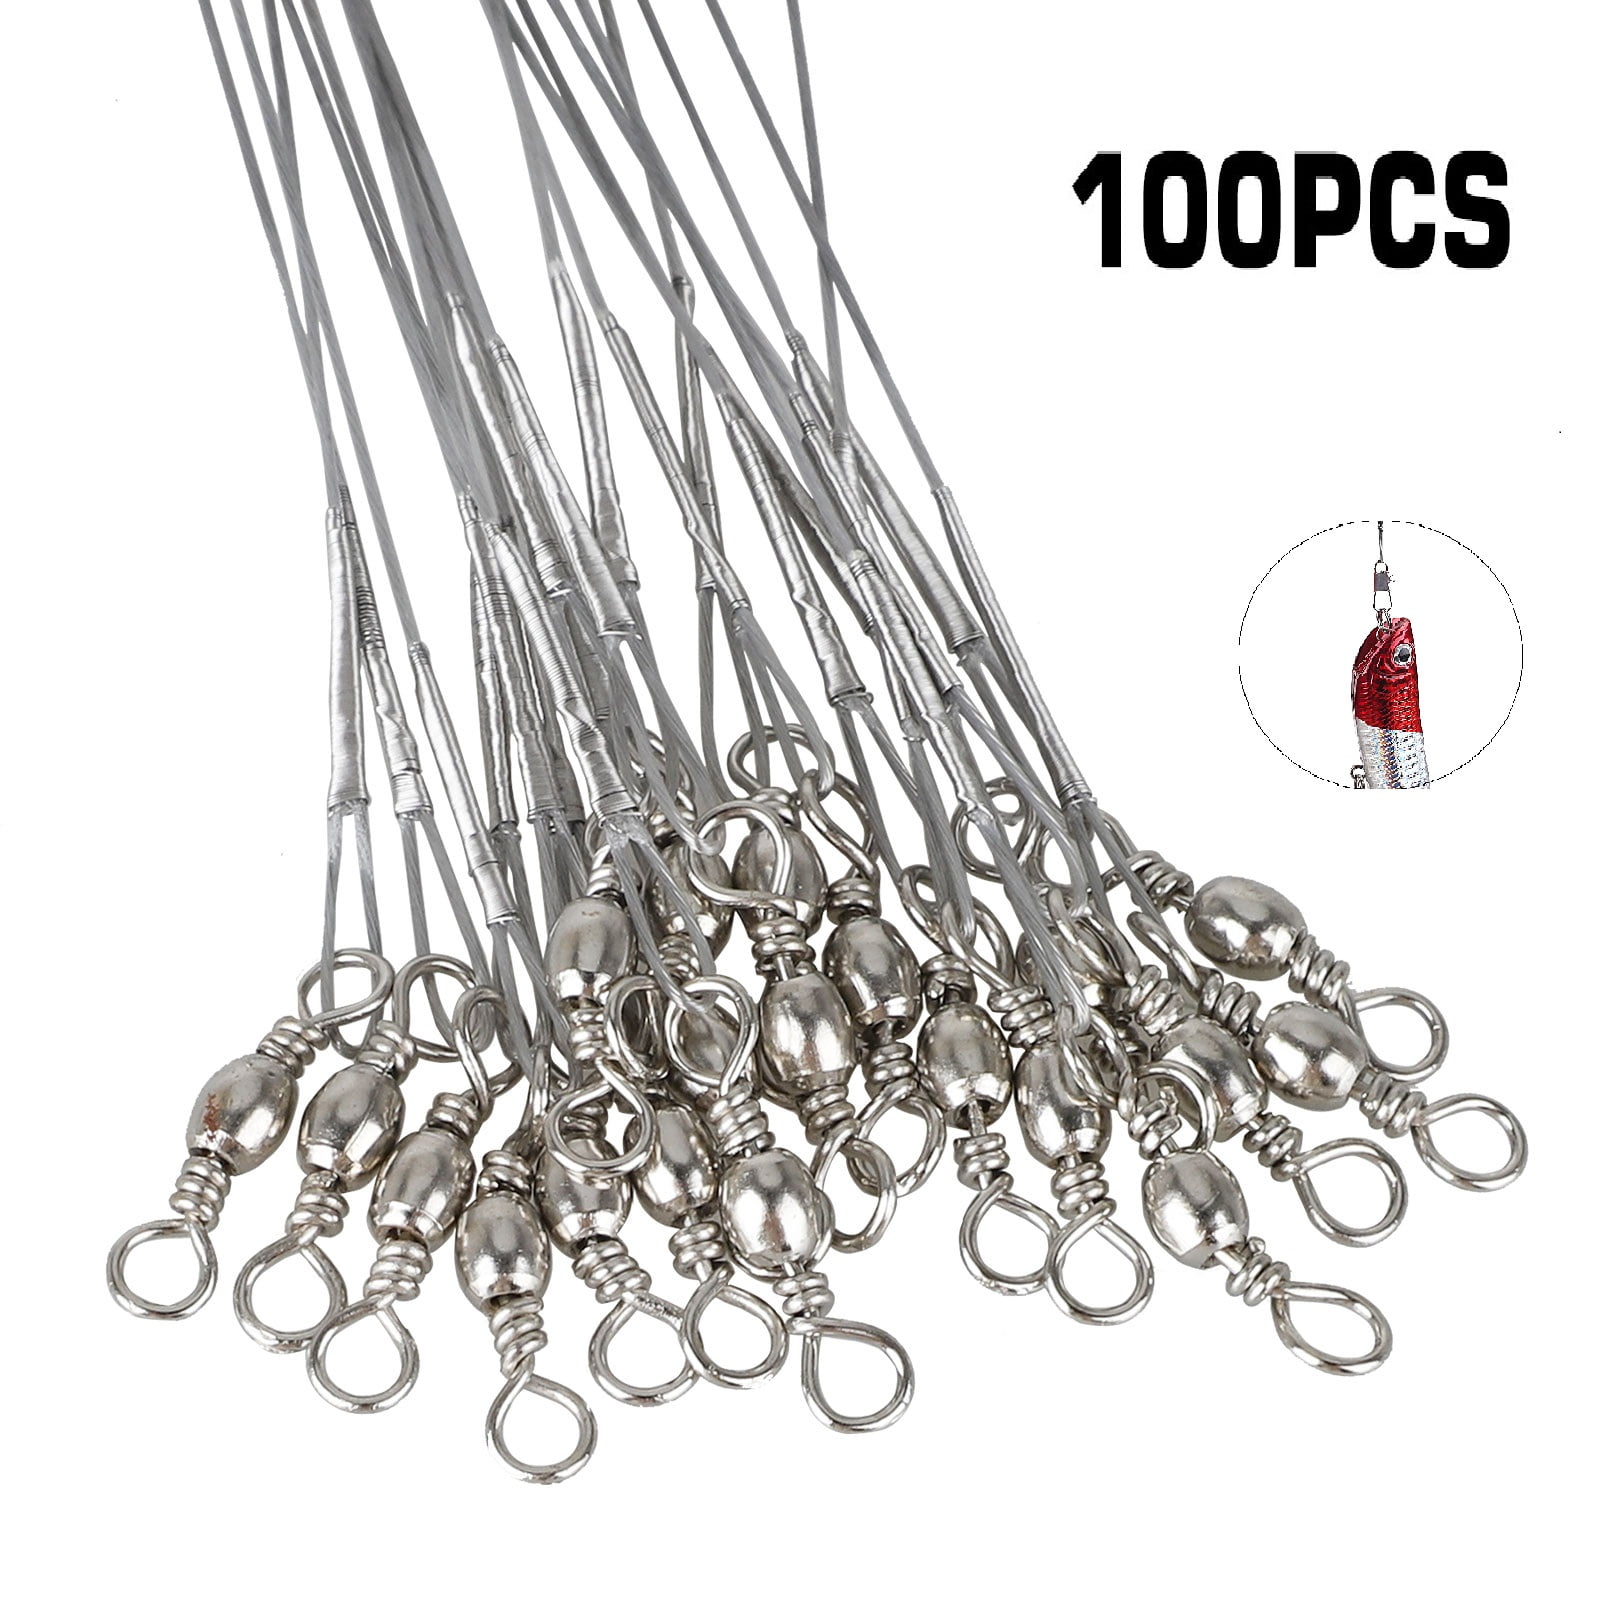 TEST-5 EA. 15 PCS STAINLESS STEEL CLEAR WIRE SPINNER LEADER 12",15"18" 140 LBS 